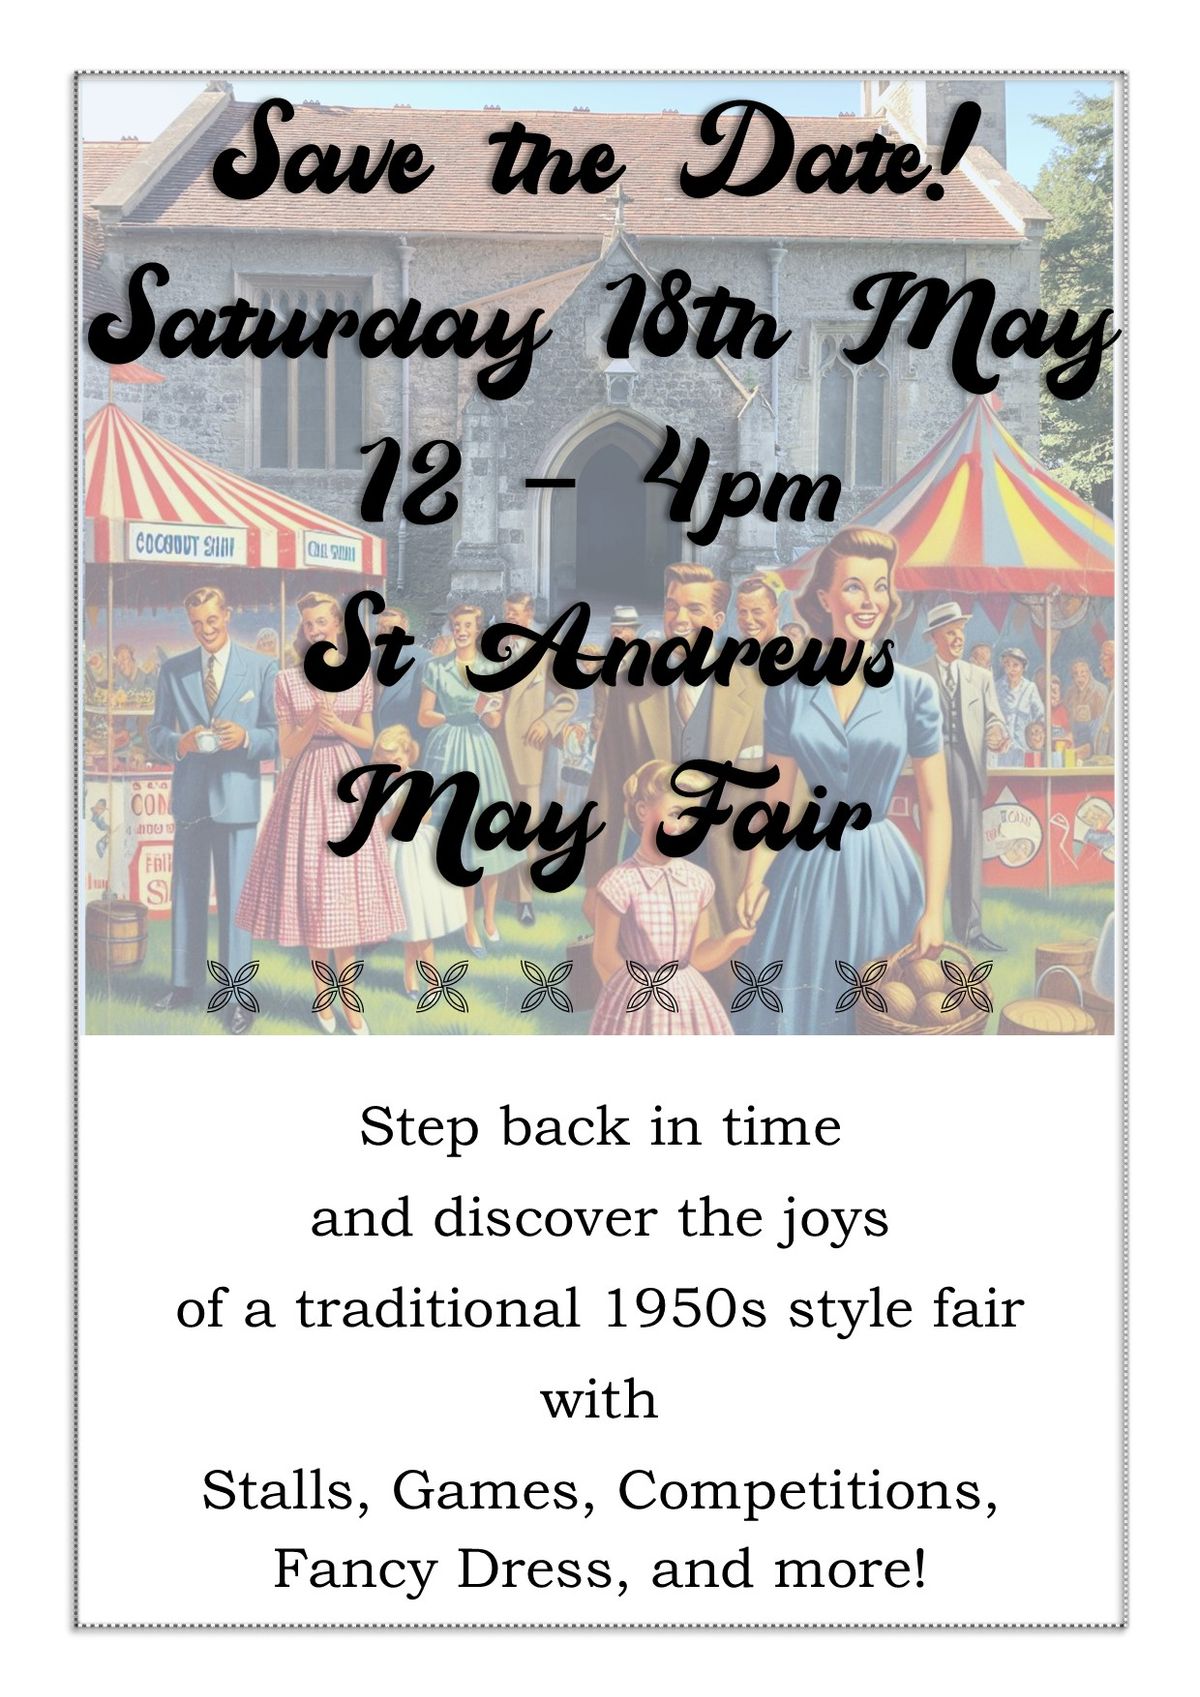 St Andrew's May Fair